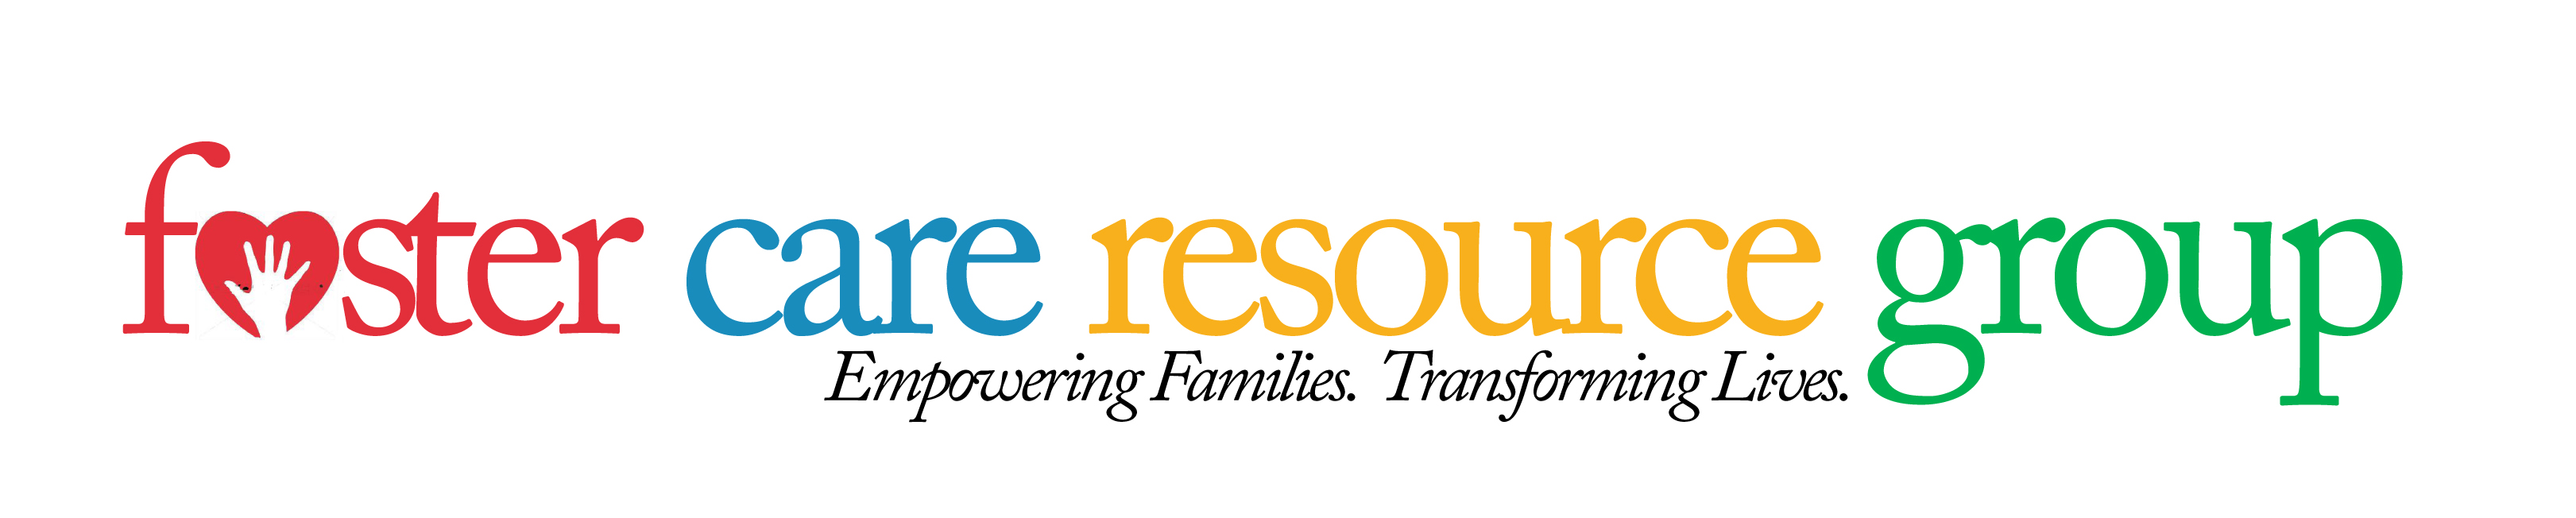 foster care resource group logo